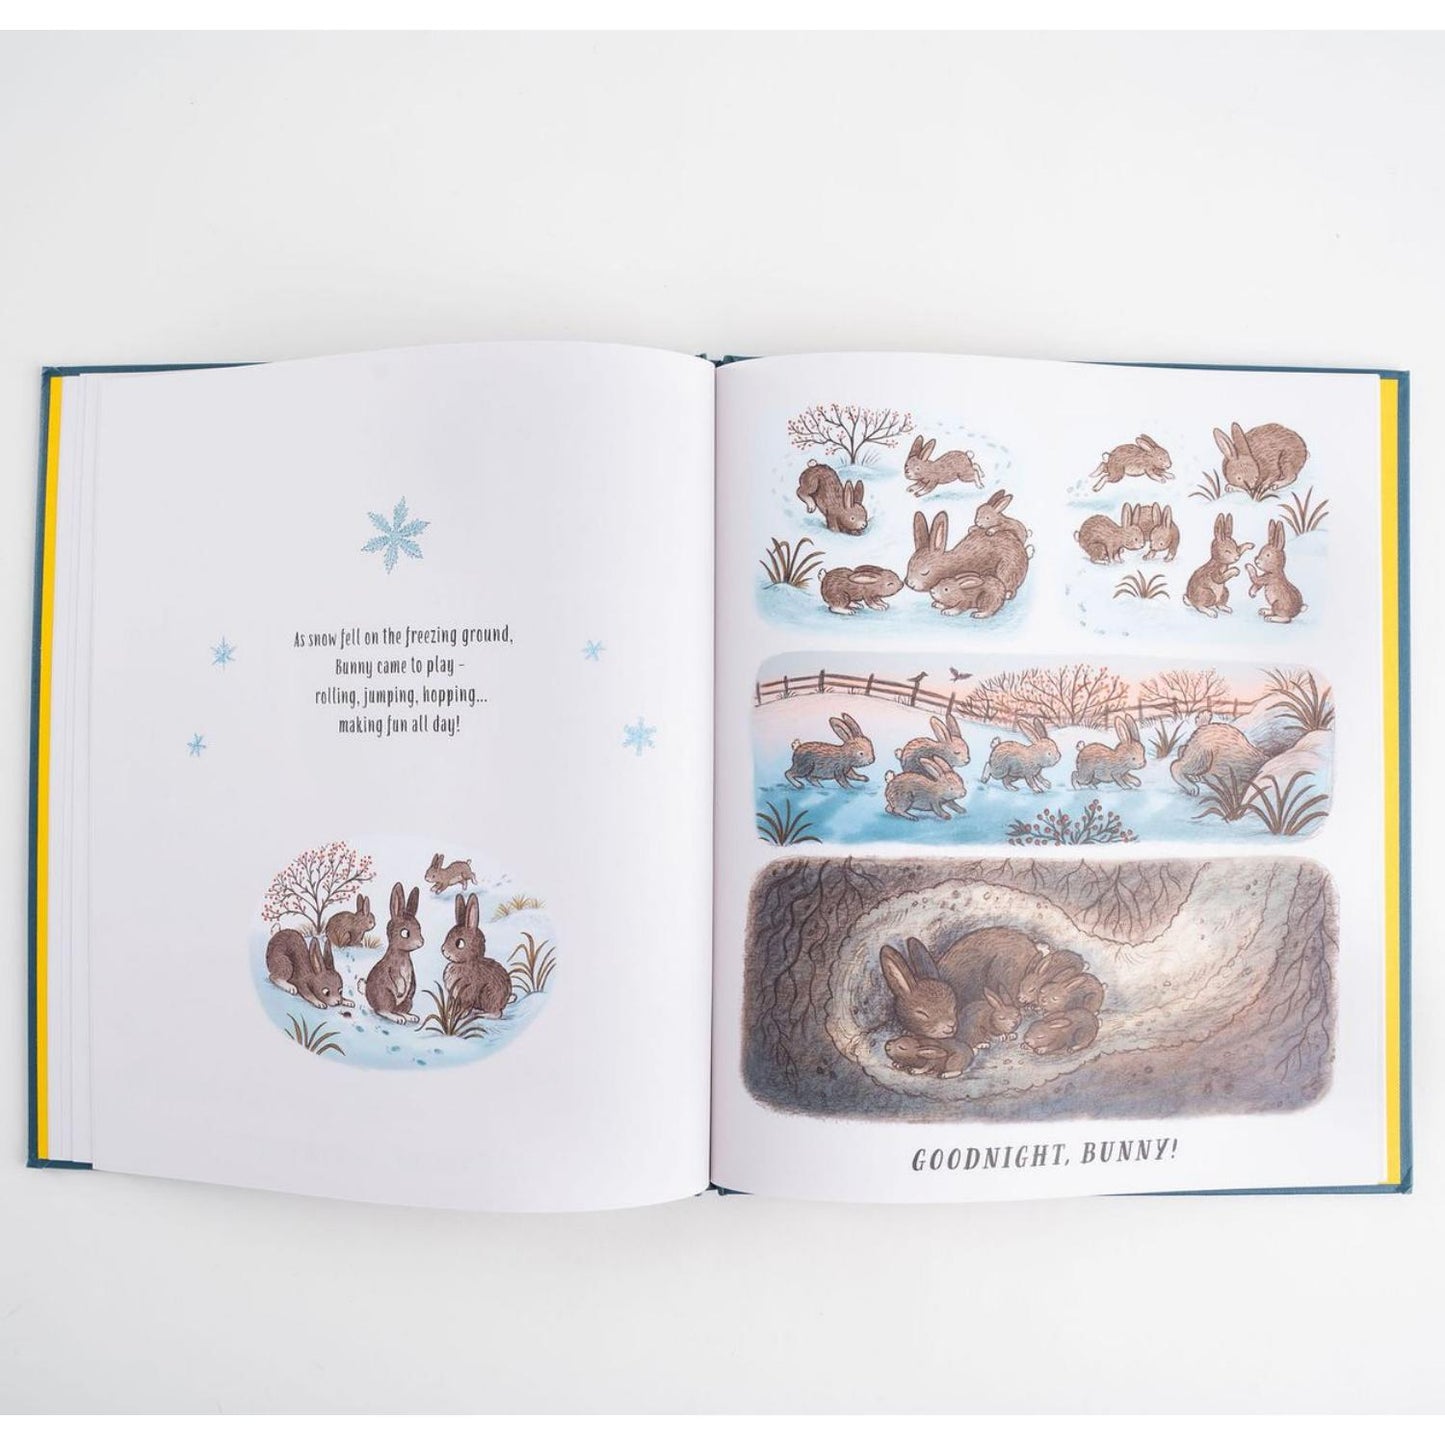 Slow Down... and Sleep Tight | Hardcover | Children's Books on Nature